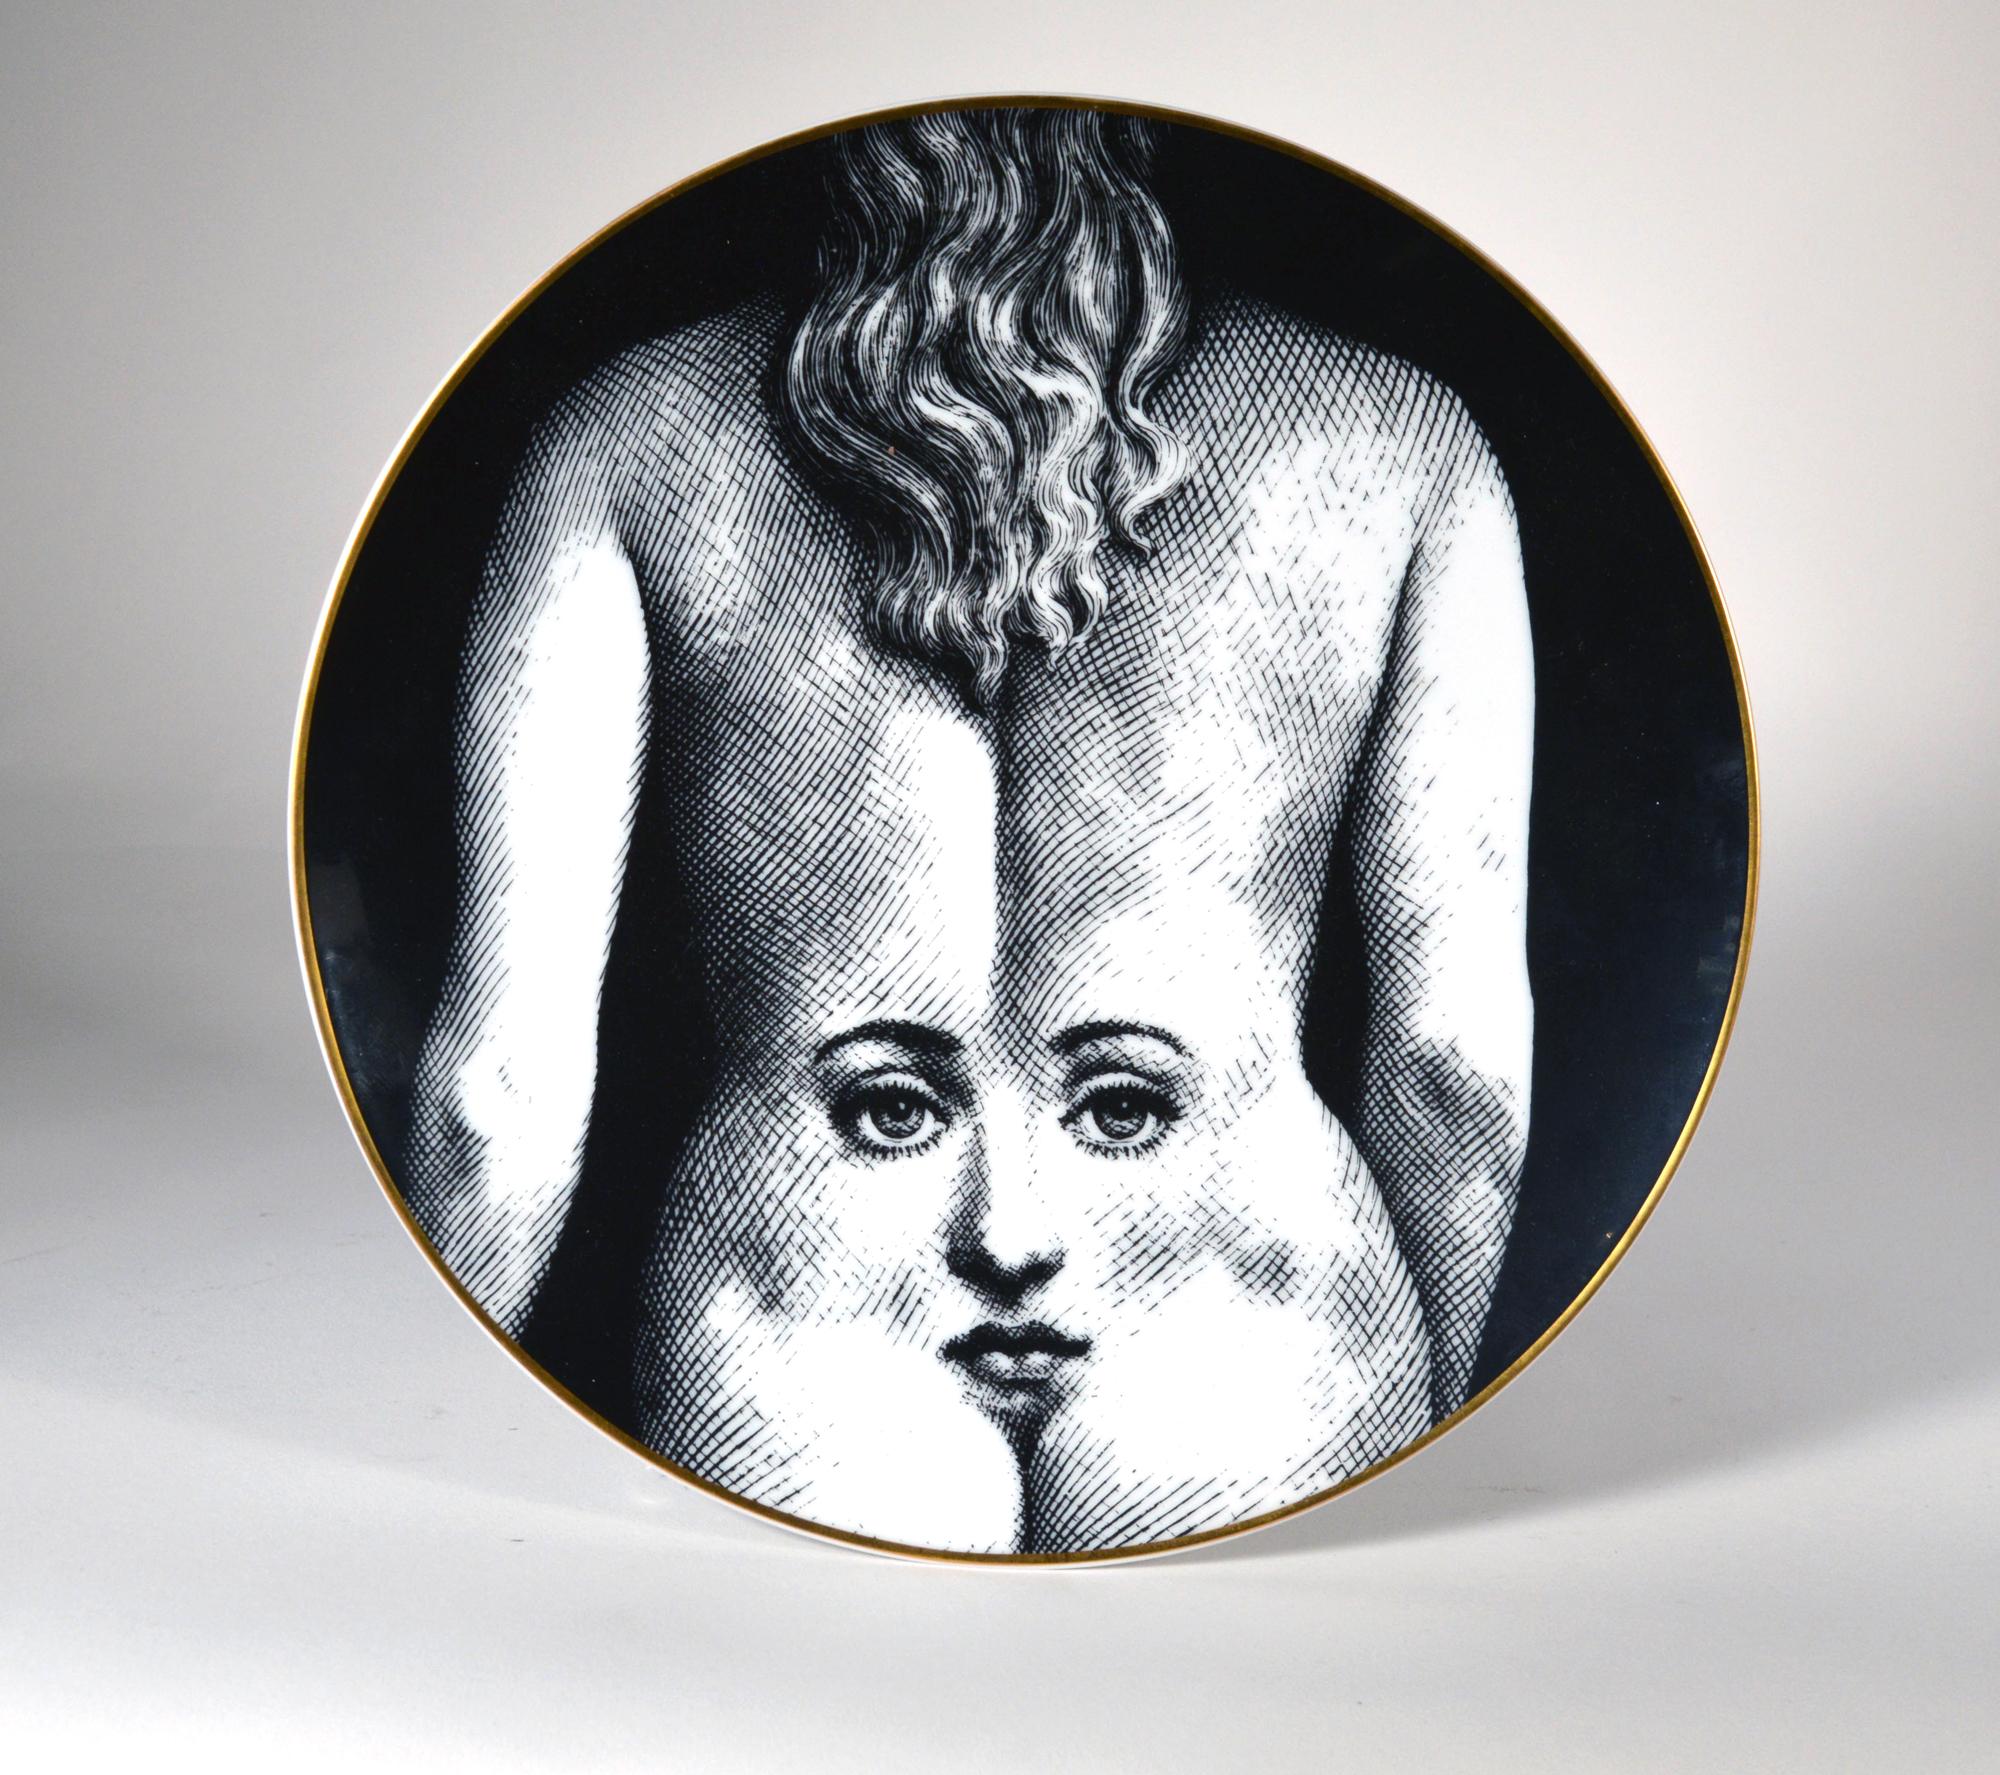 Piero Fornasetti Rosenthal Porcelain Themes And Variations Plate, 
Motiv Number 28,
1980s

The striking Rosenthal Fornasetti gold-rimmed black and white printed plate with the face of Lina Cavalieri depicted on the back of a Lady.

Dimension: